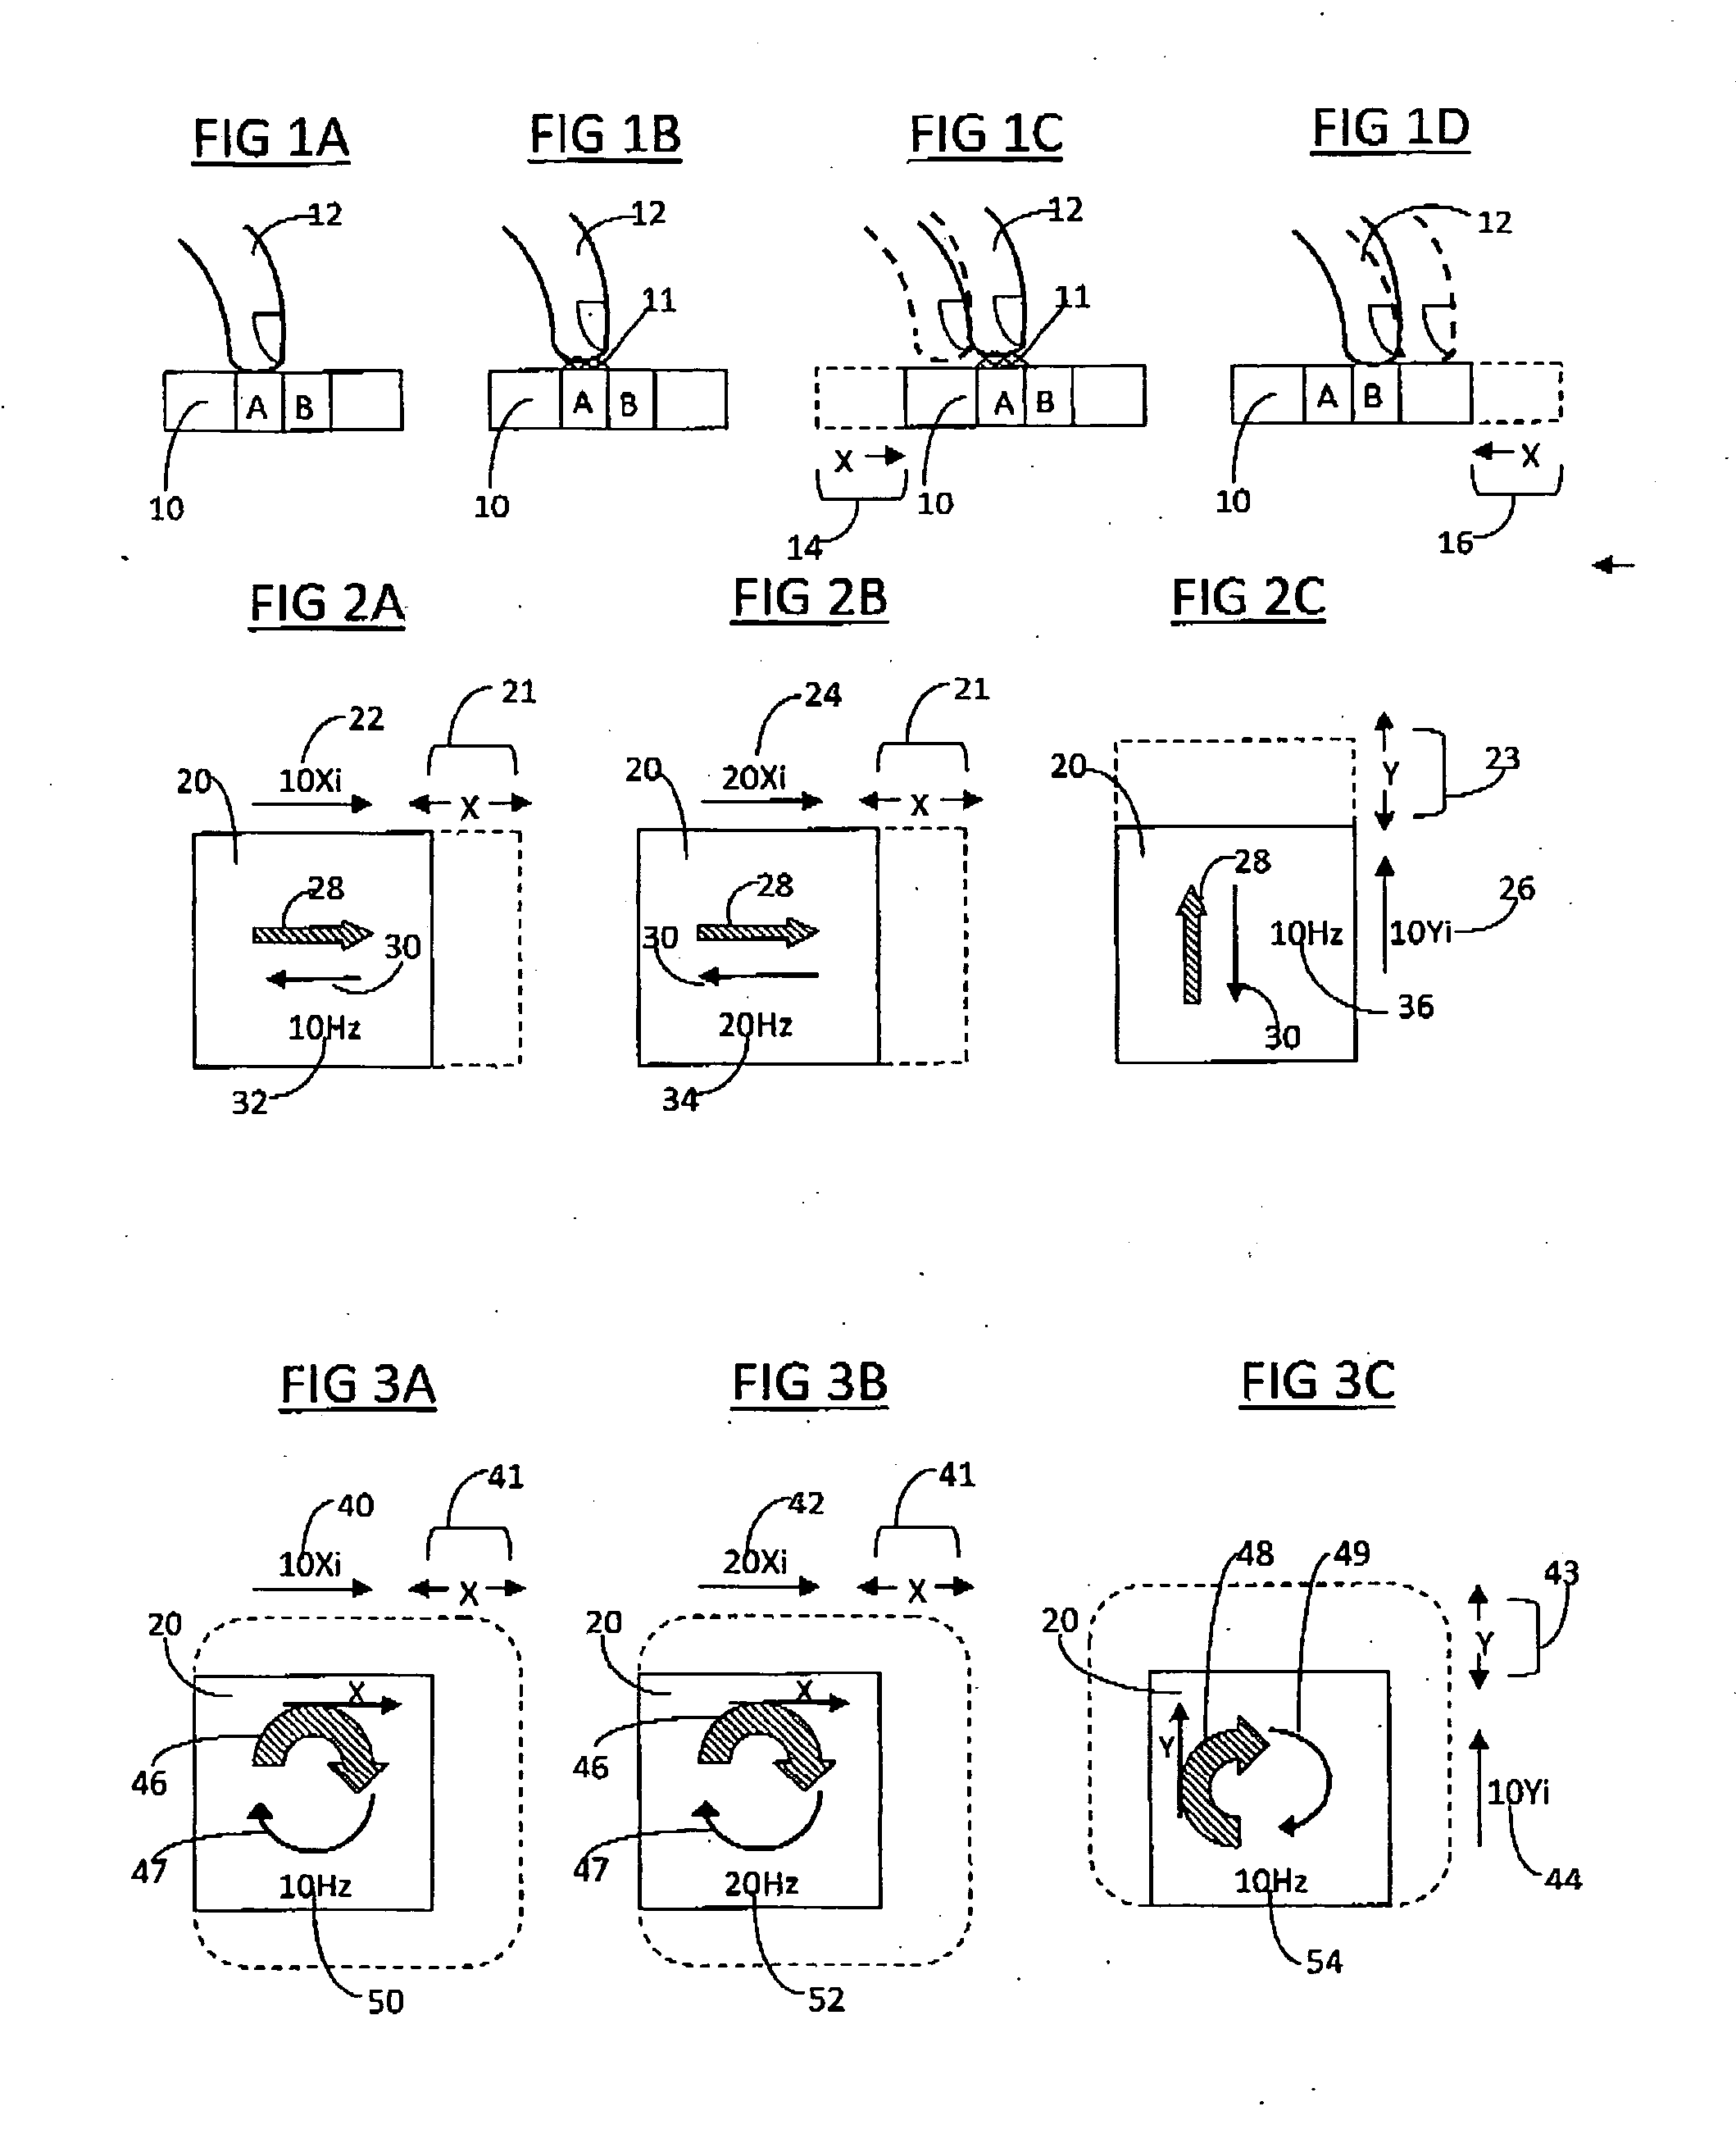 Apparatus and method for producing lateral force on a touchscreen